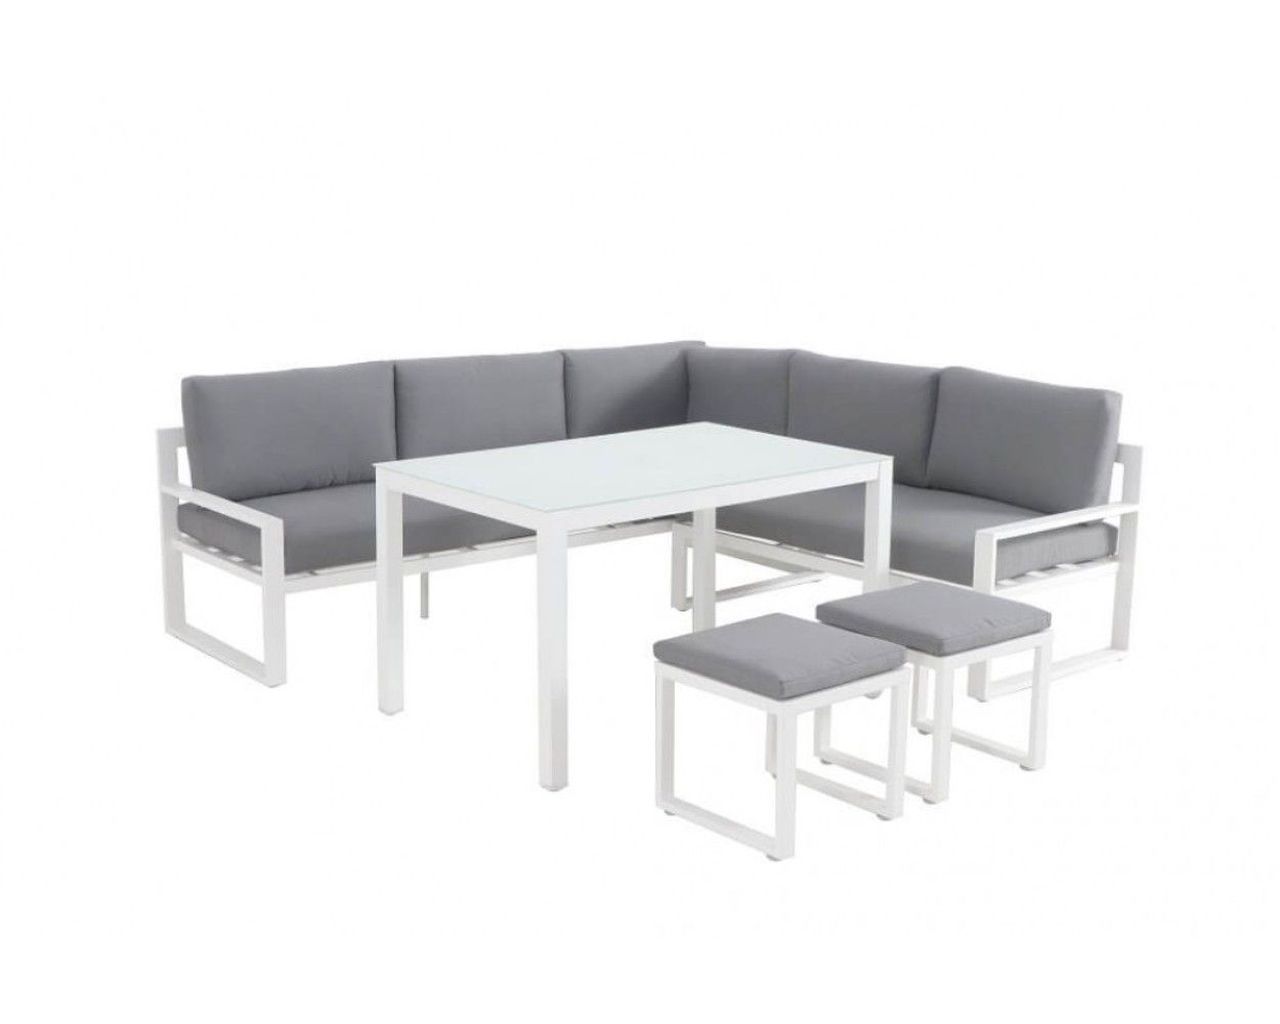 Patmos 5 Piece Low Dining Setting, White, small-swatch